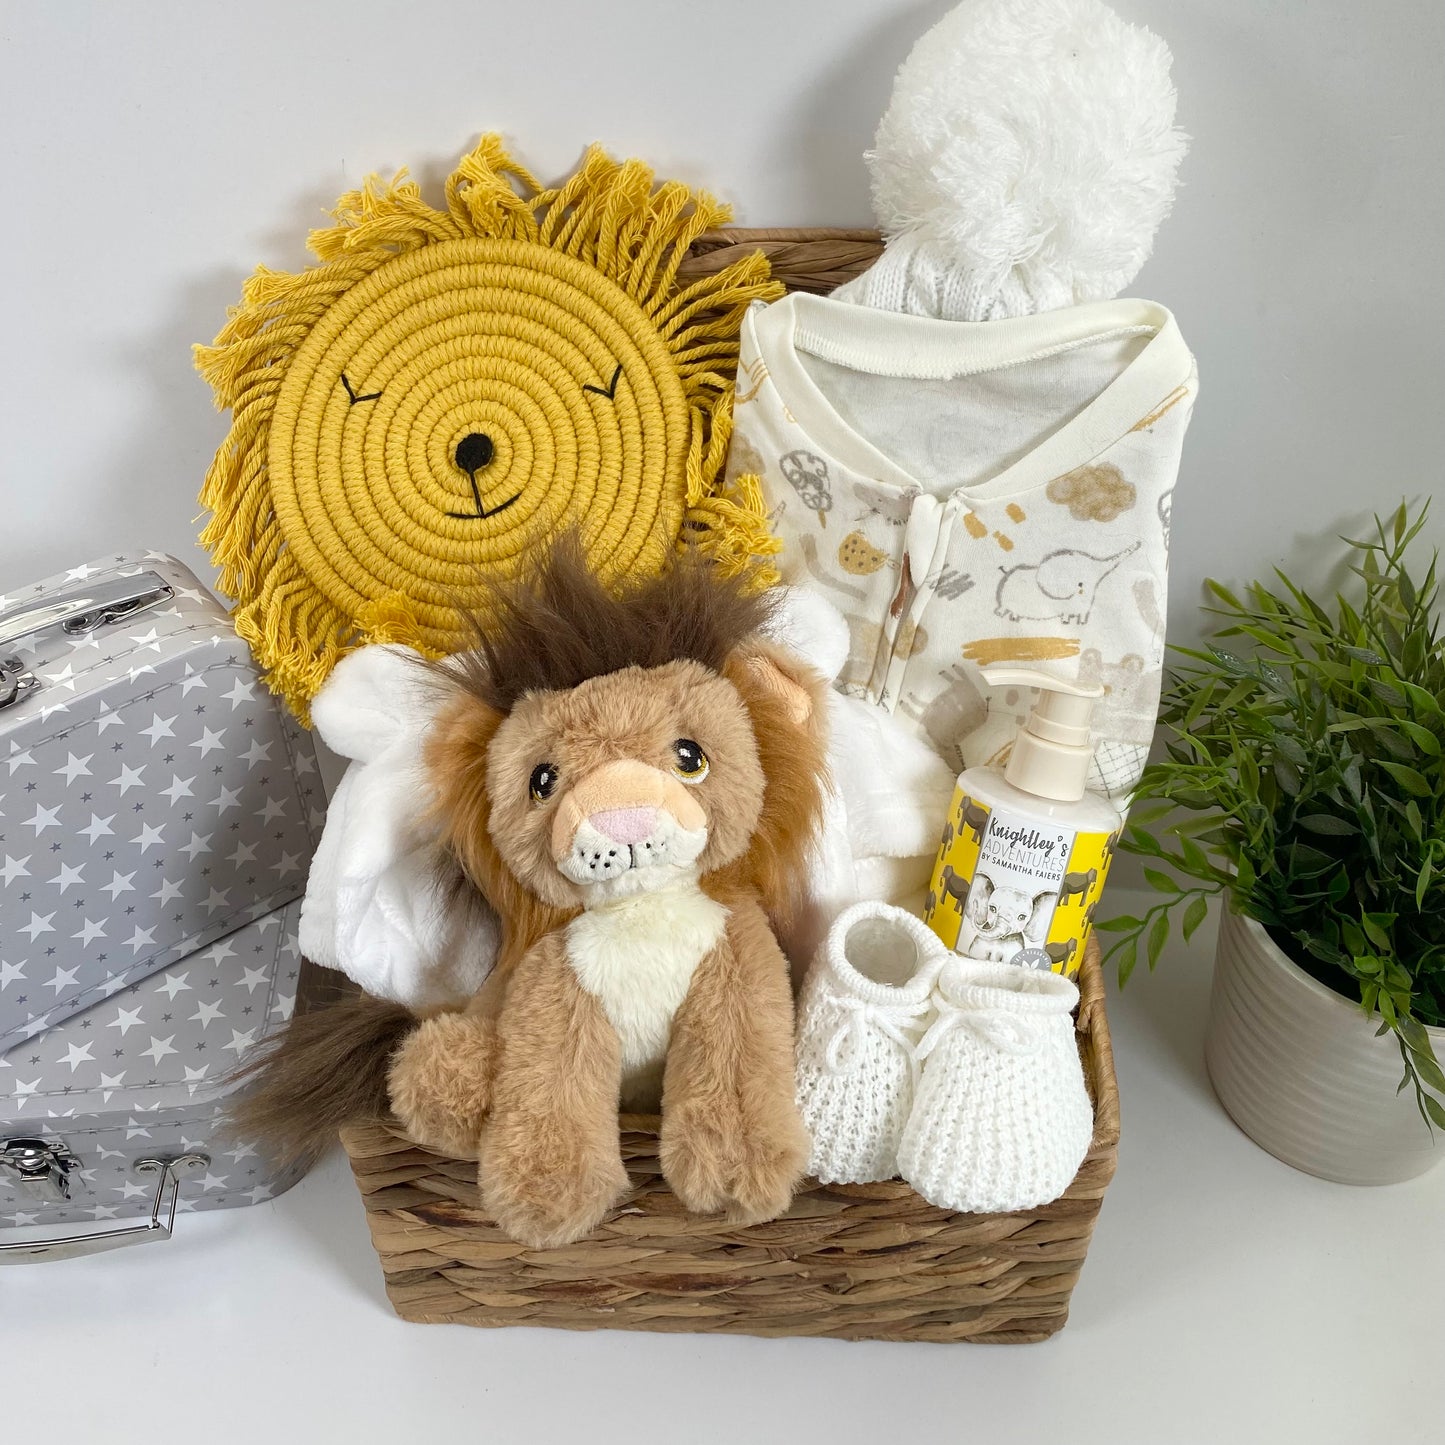 Unisex Baby Gift Hamper, Lion Cuddly Toy, Safari Zip Up Baby Sleepsuit, Baby Dressing Gown, New Mum Gift, Baby Toiletries, Mum To Be Hamper, Baby Shower Gifts.